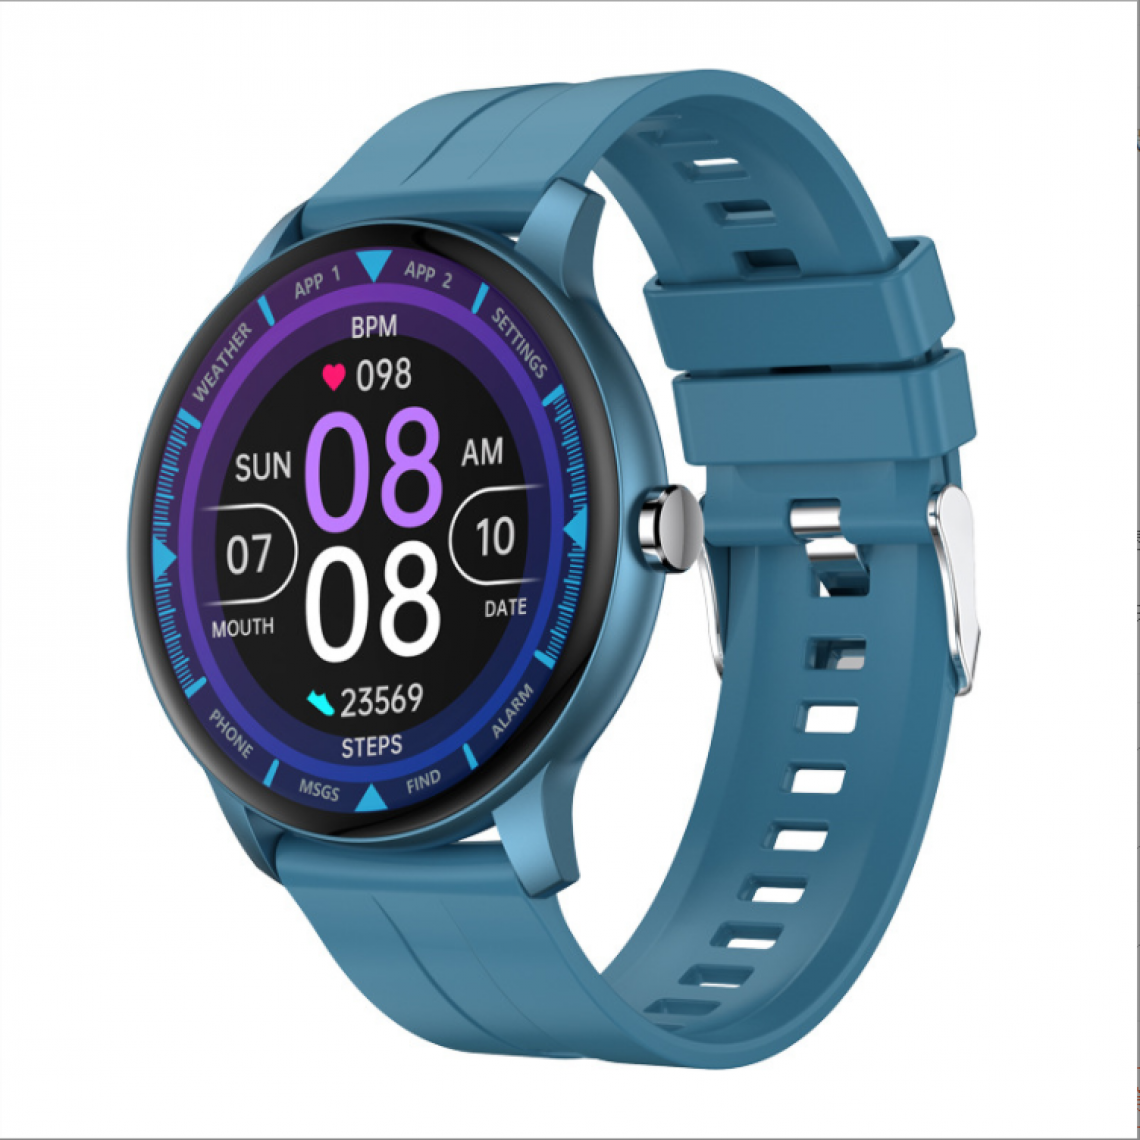 Chronotech Montres - Chronus Smart Watch, Bluetooth Calling, Sleep Monitoring, Sports Mode, for Android IOS (Blue) - Montre connectée